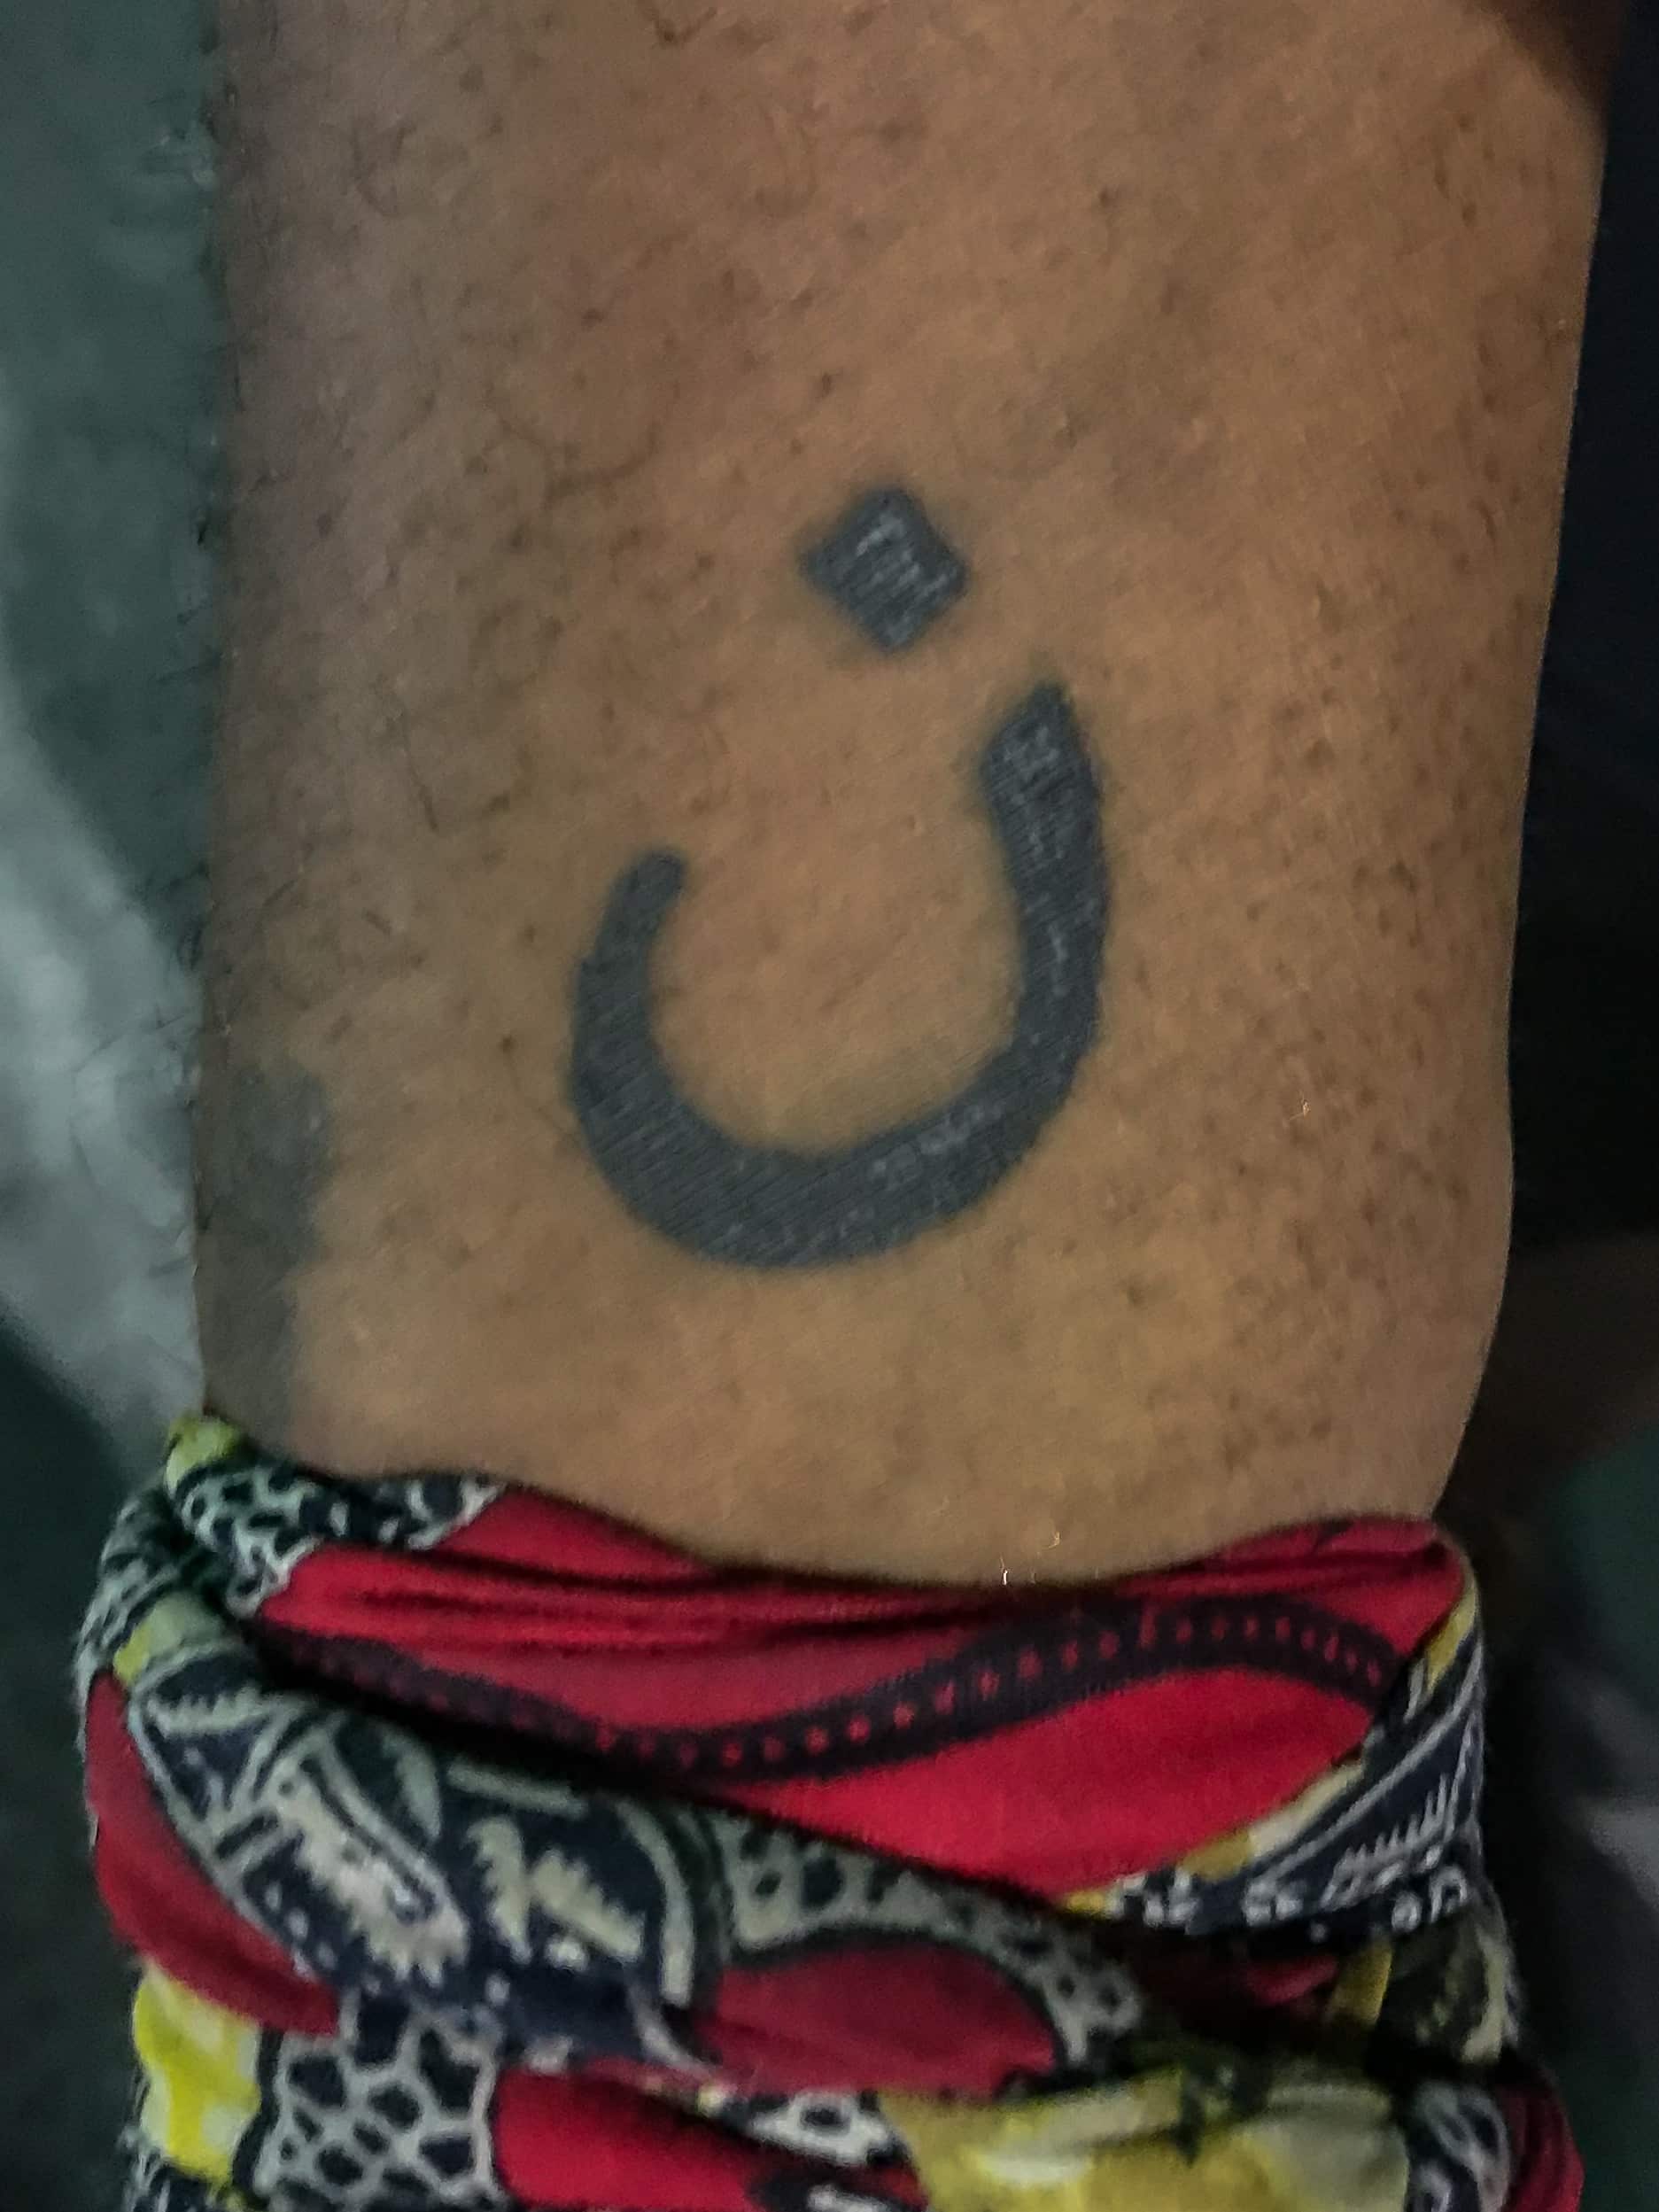 This is Mykel Perdue. This tattoo is the Arabic symbol for the letter N. It is to represent the Israelites crucified a Nazarene and Perdue relates to and is a brother of all persecuted Christians around the world.